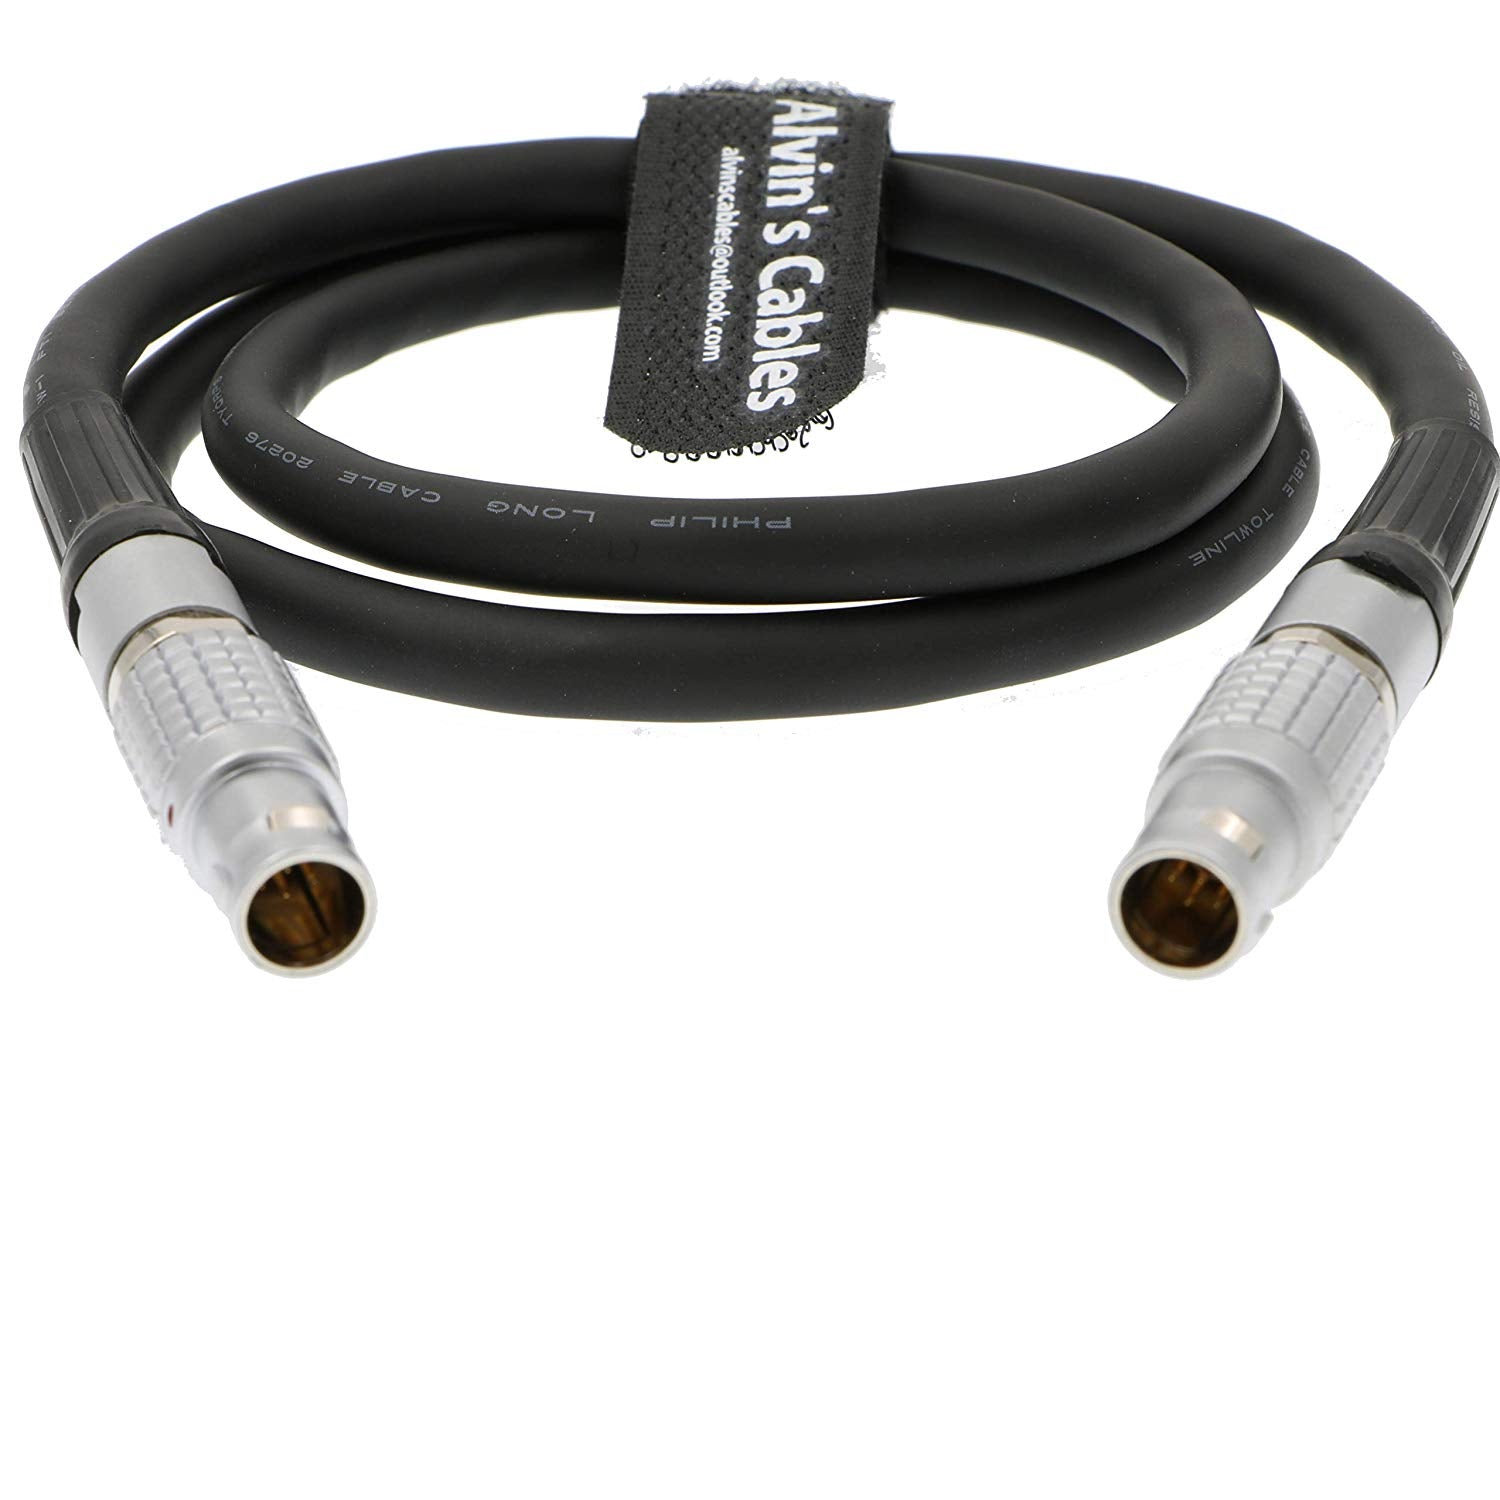 Alvin's Cables 7 Pin Digital Motor Cable for fSTOP Bartech Wireless Focus Digital Receiver